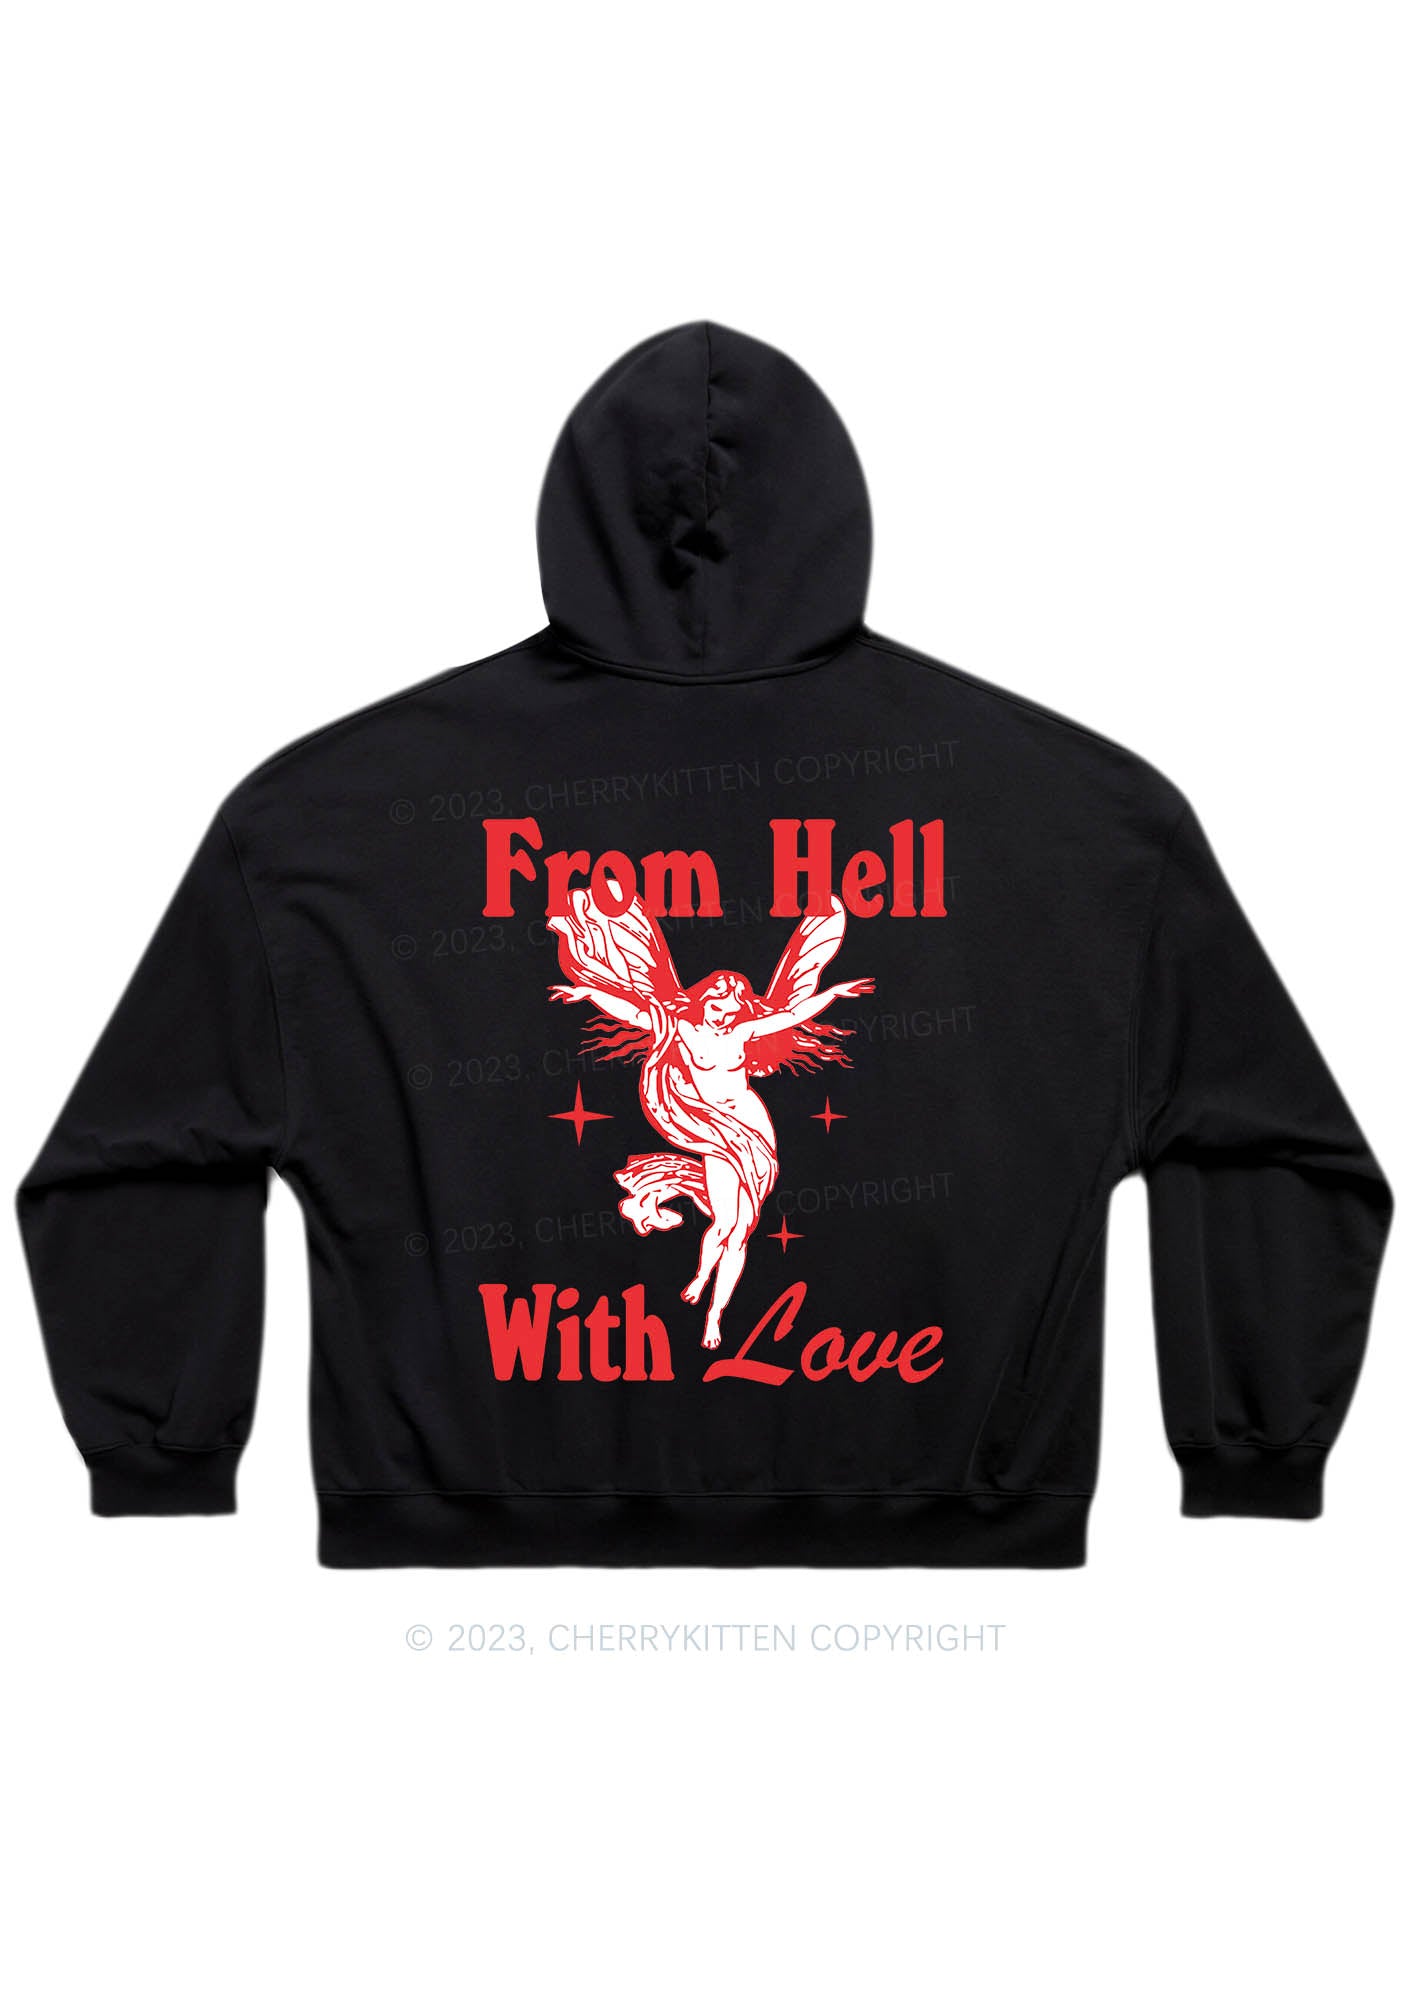 From Hall With Love Y2K Hoodie Cherrykitten